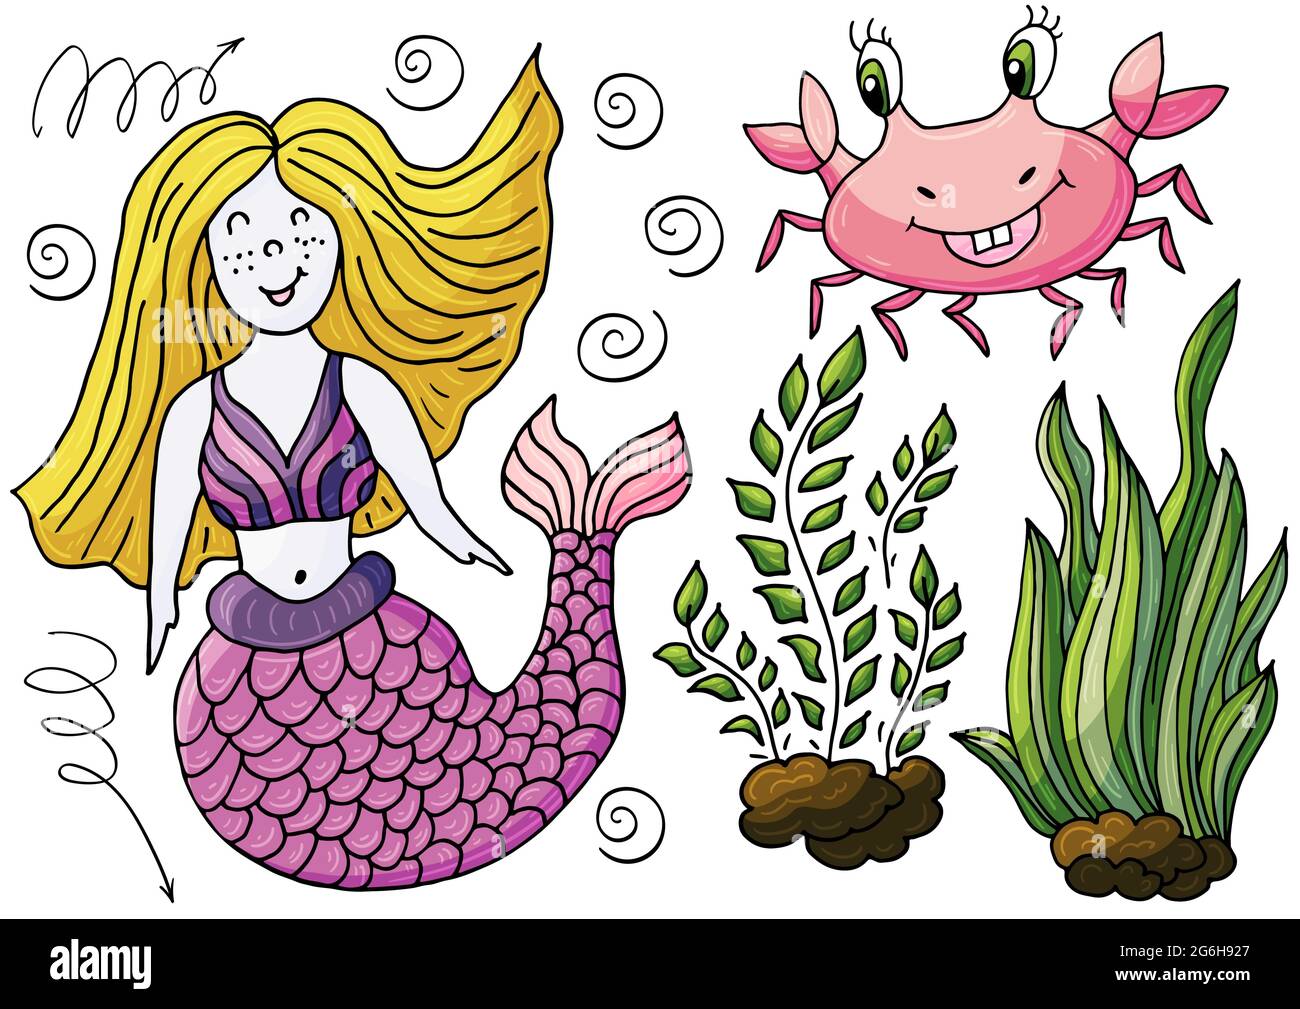 Vector illustration, ocean, underwater world, marine clipart. Set of Cartoon characters for cards, flyers, banners, children's books. Print for t-shir Stock Vector